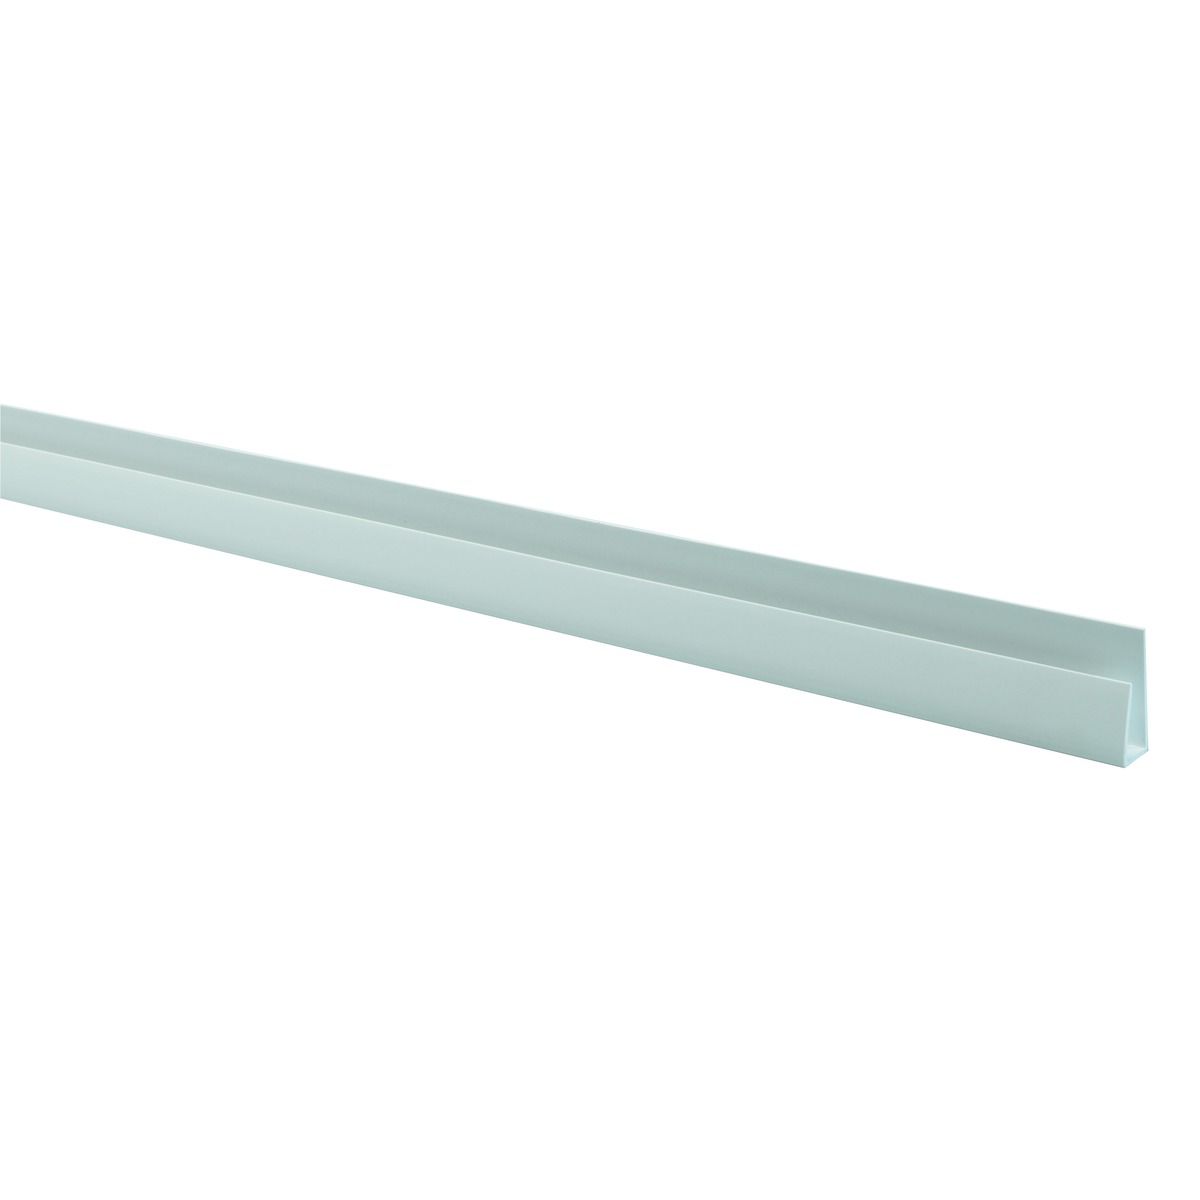 Image of Wickes PVCu White Universal Channel Board - 2500mm